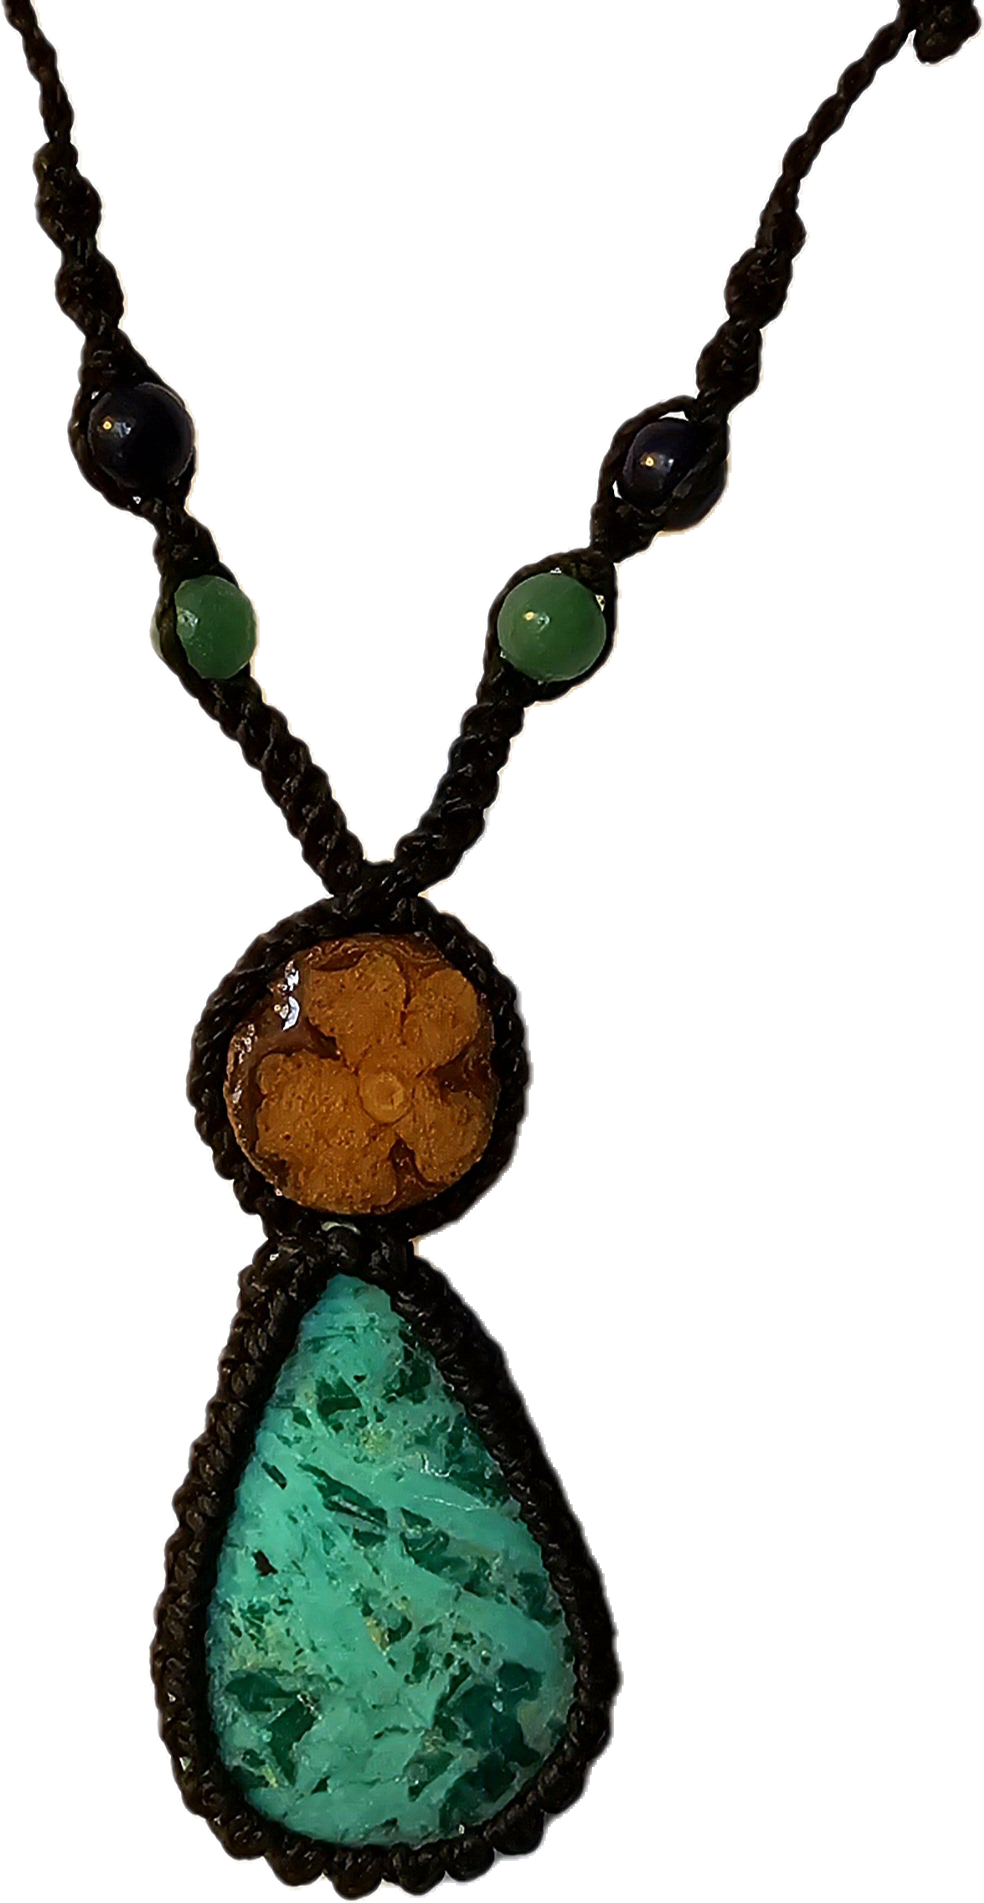 Ayahuasca vine and stone necklace